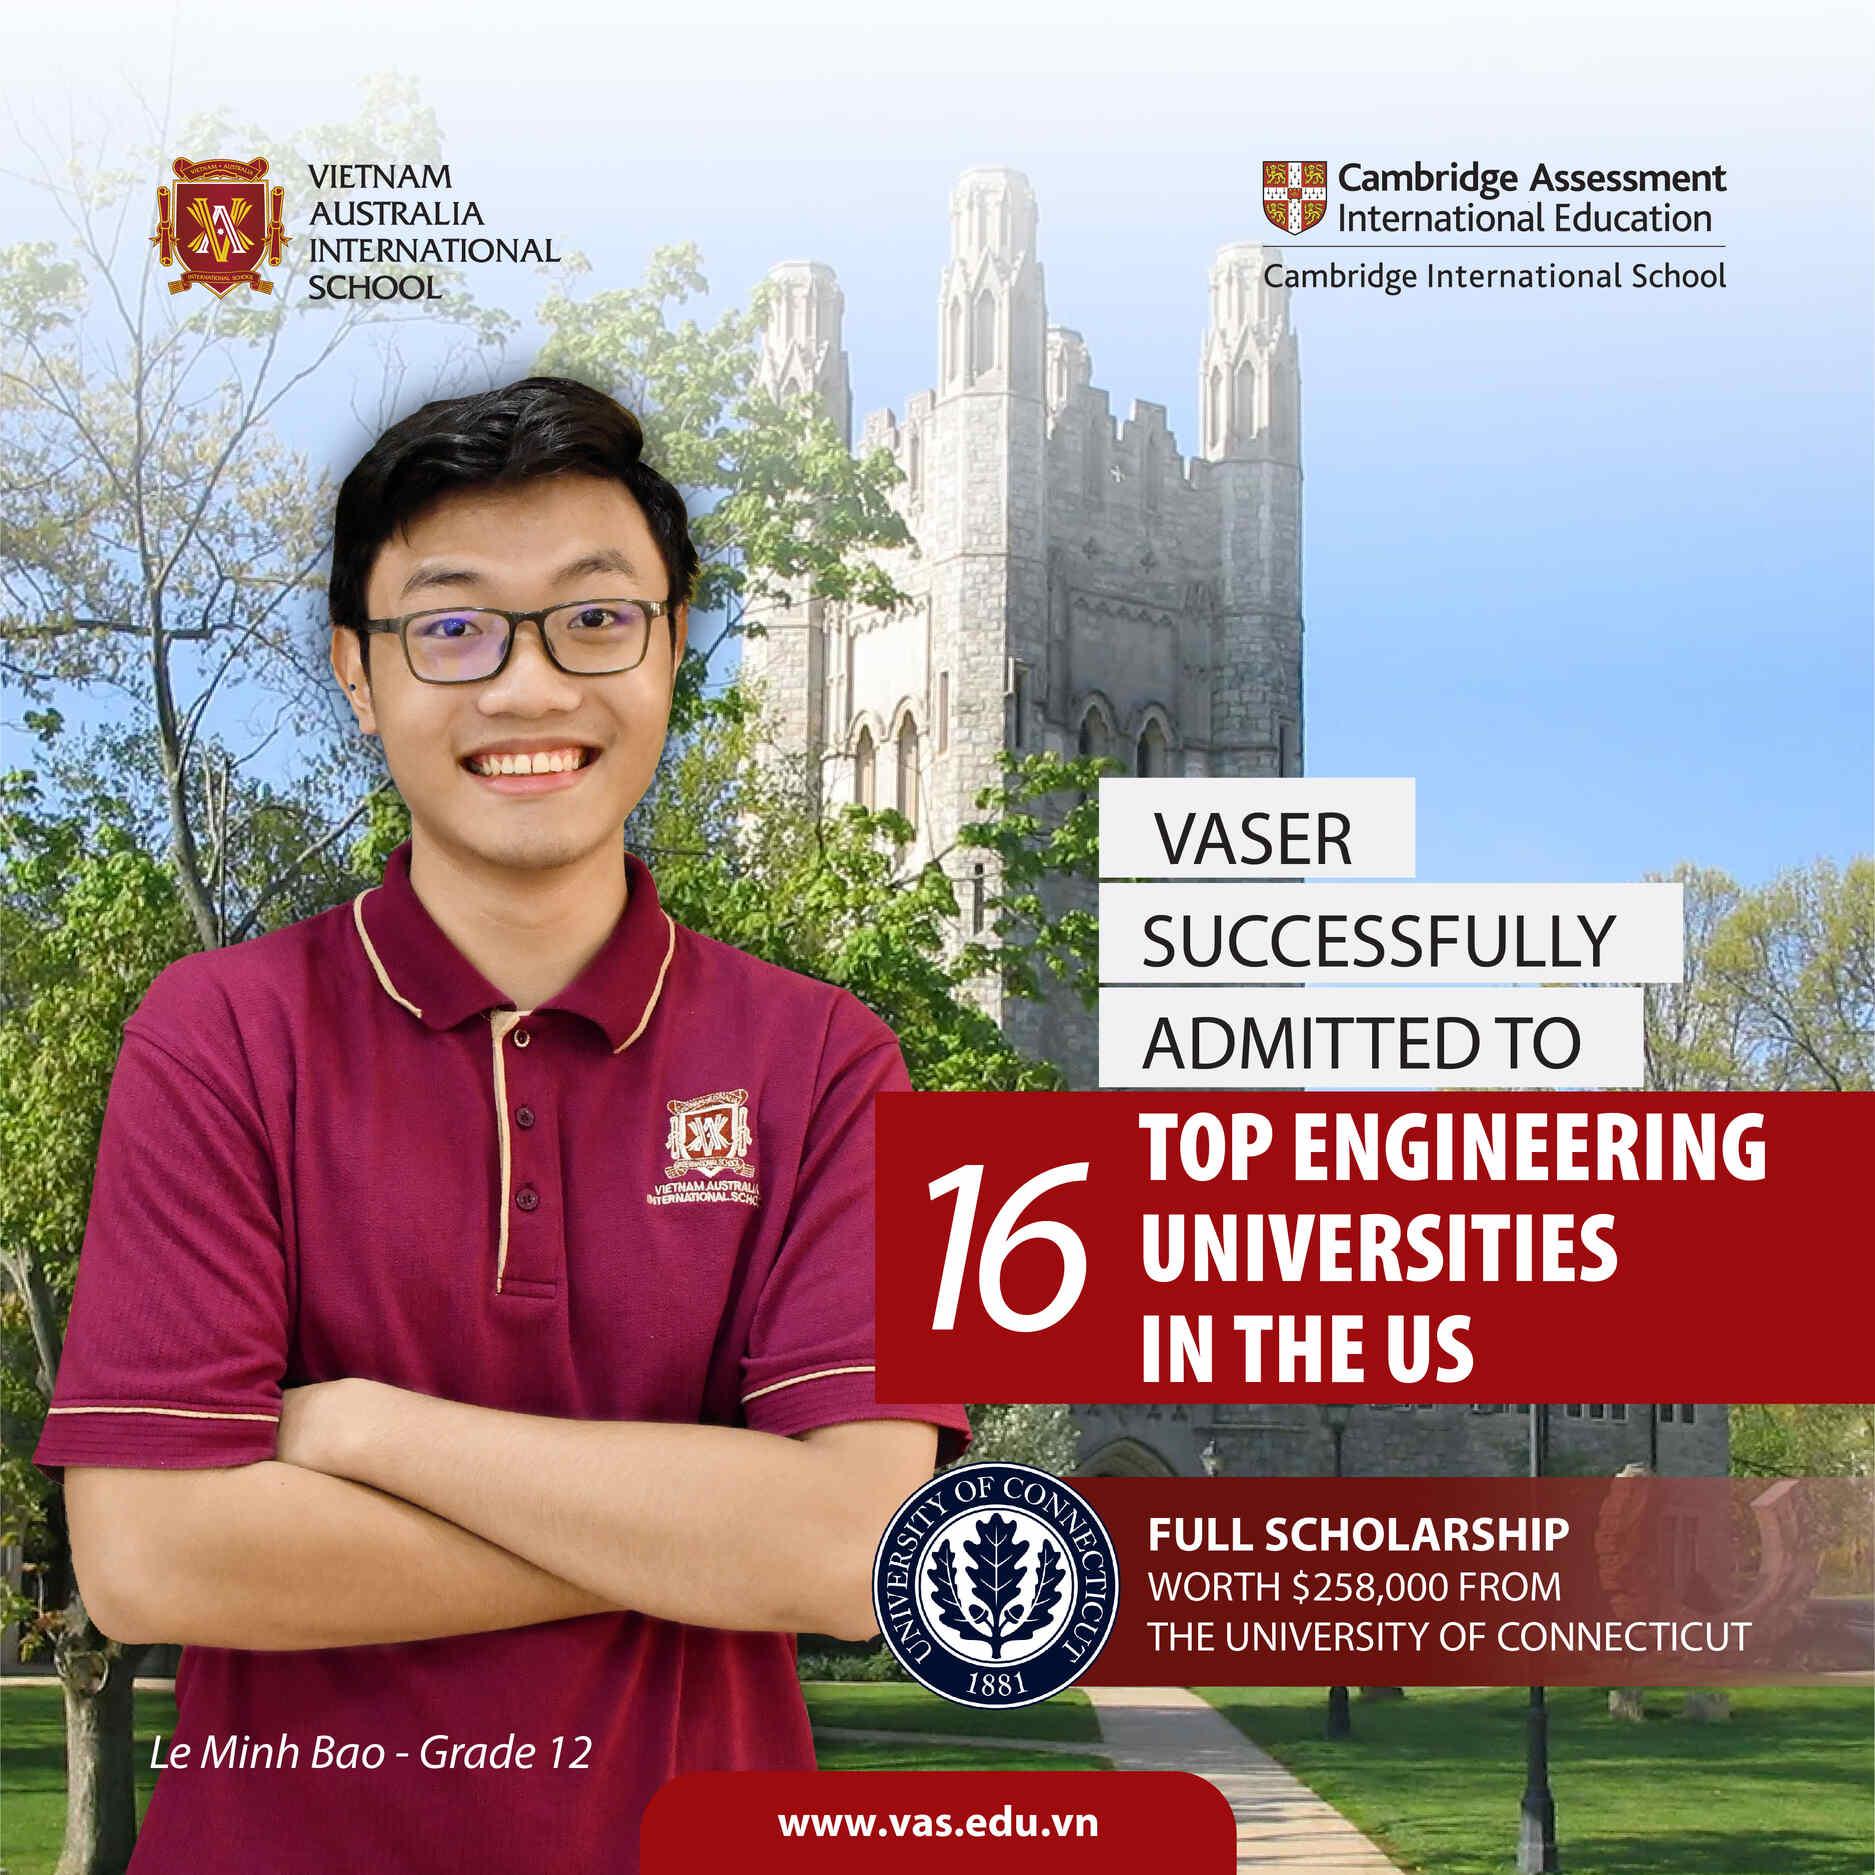 The first and only VASer in Vietnam to receive a full scholarship worth $257,912 at the University of Connecticut, successfully admitted to 16 prestigious American universities